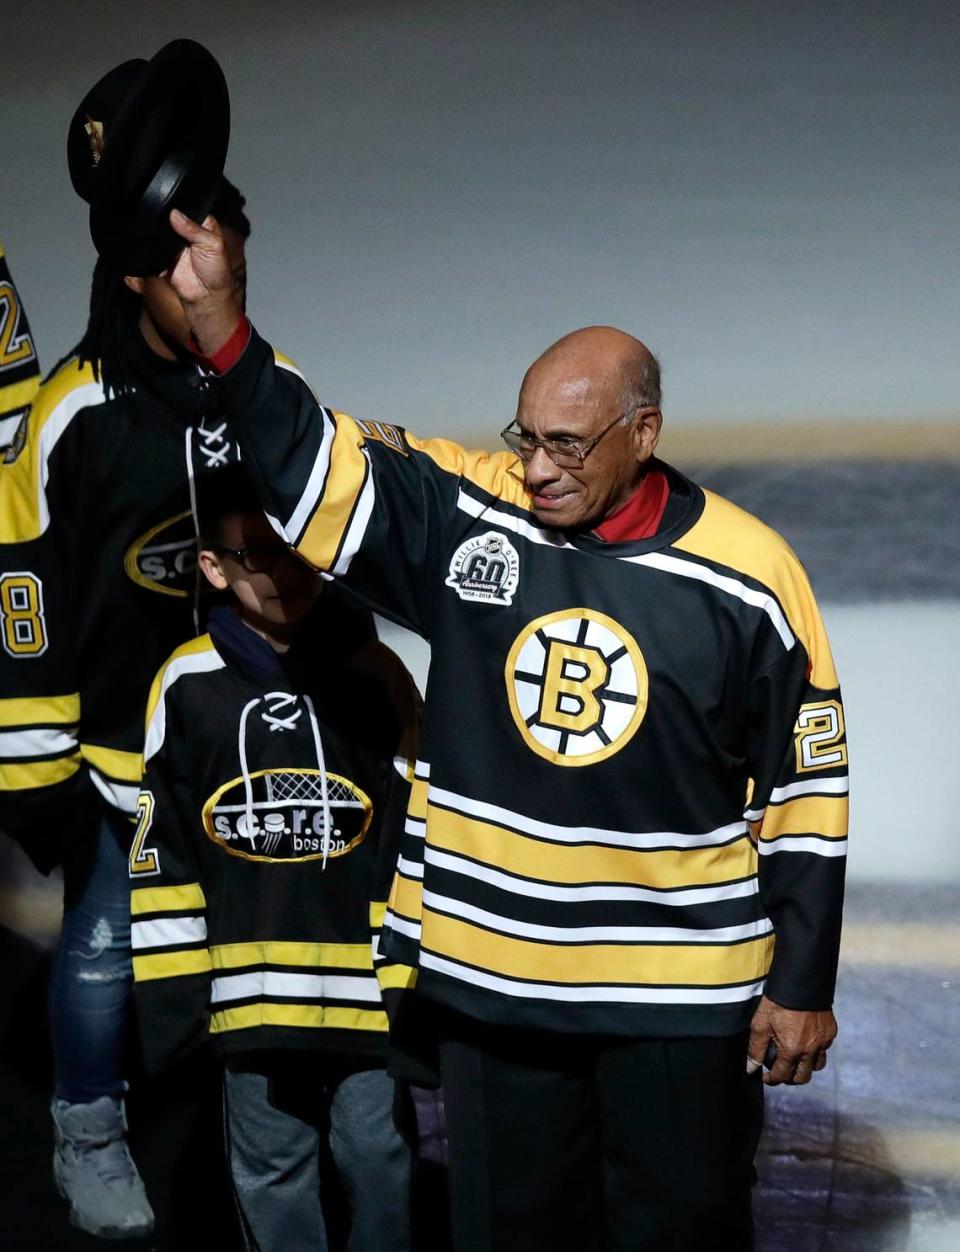 Former Boston Bruins forward Willie O’Ree tips his hat as he is honored prior to the first period of an NHL hockey game against the Montreal Canadiens in Boston, Wednesday, Jan. 17, 2018. (AP Photo/Charles Krupa, File)